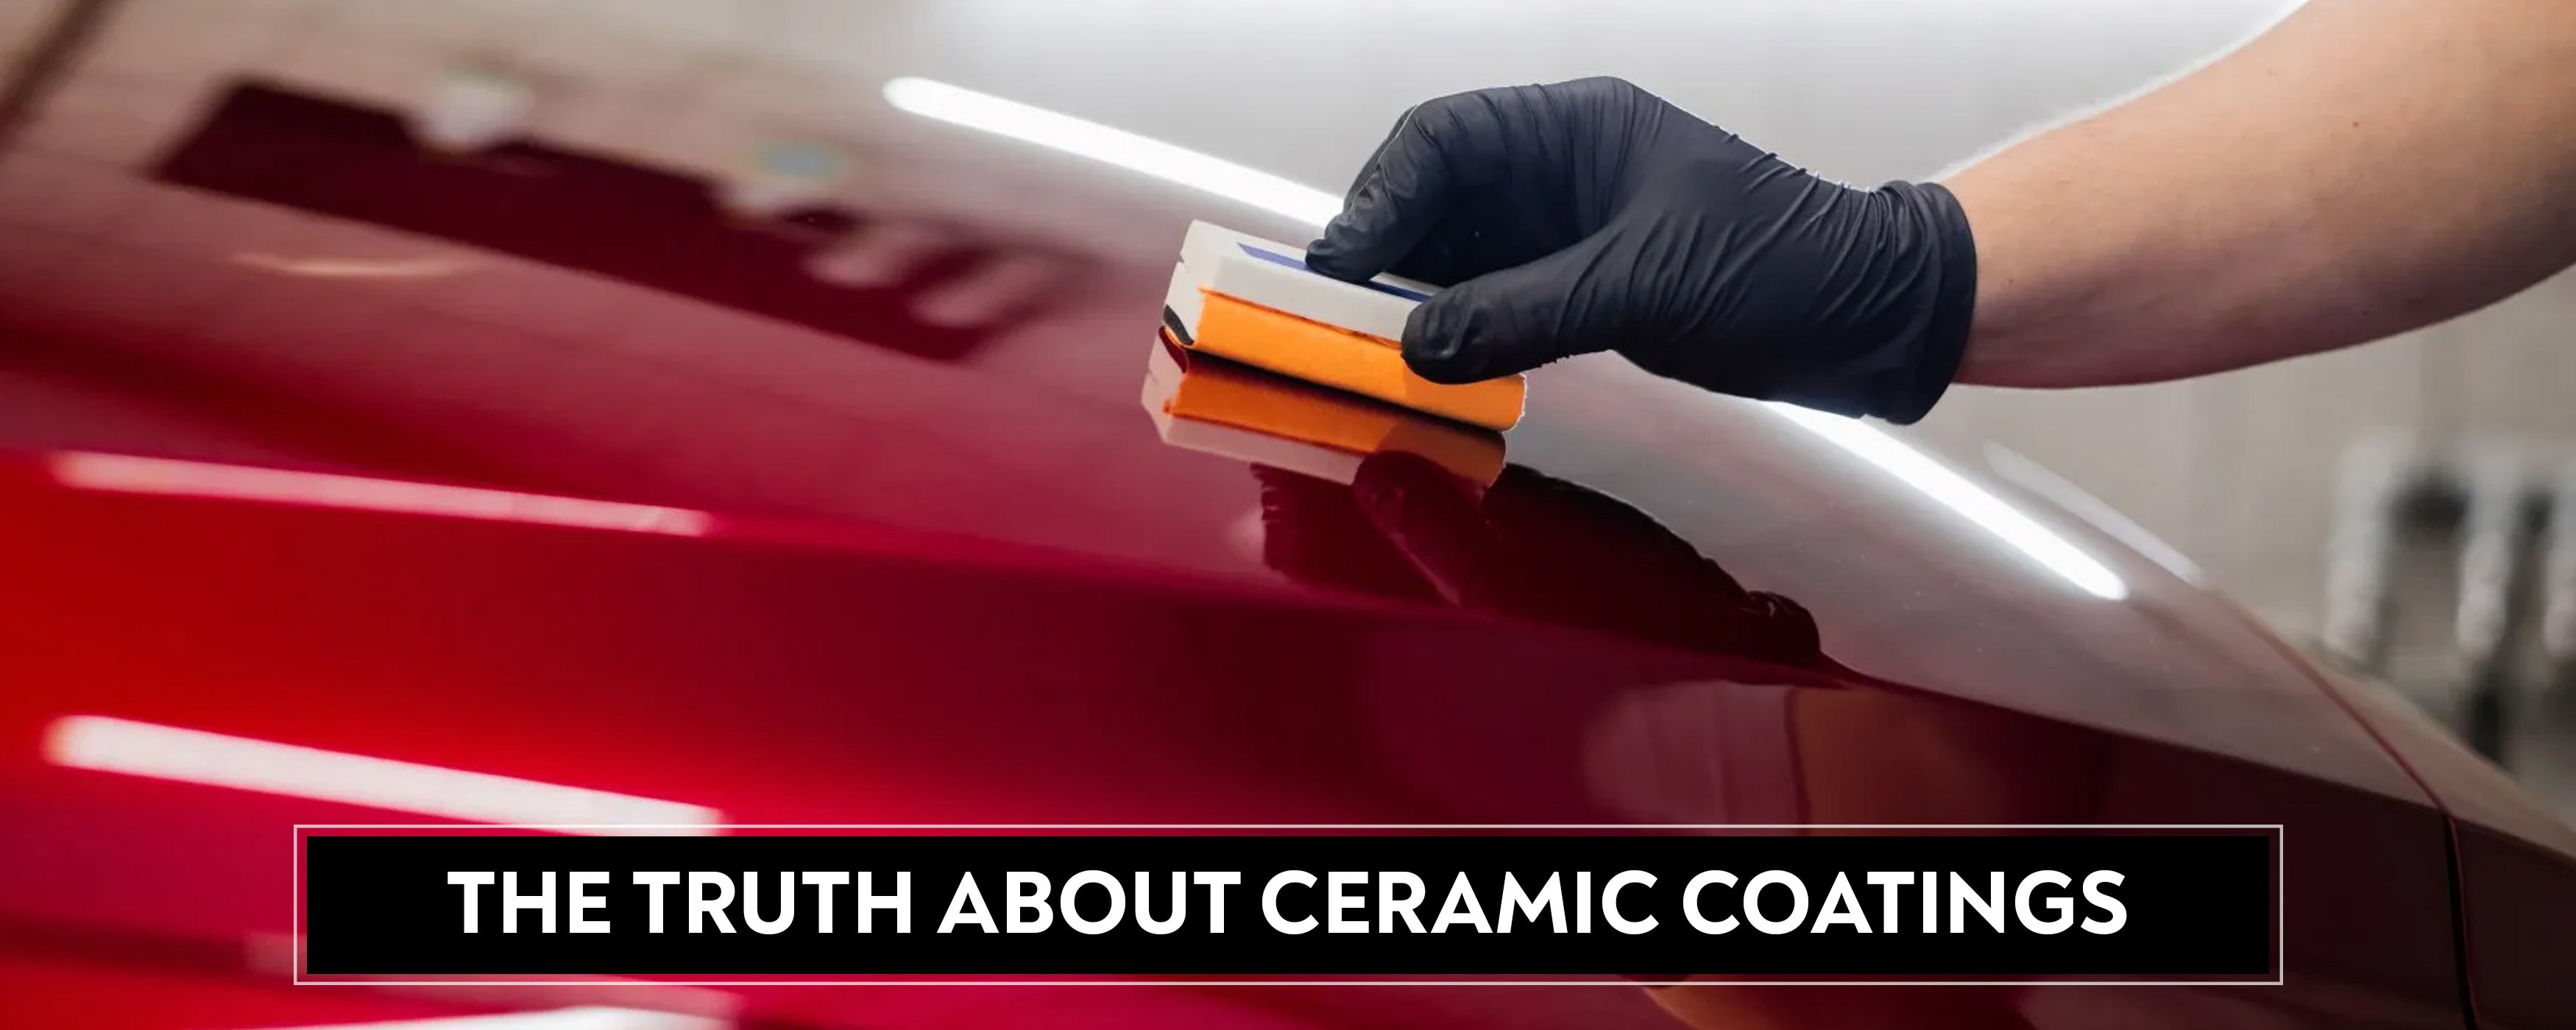 The Truth About Ceramic Coatings